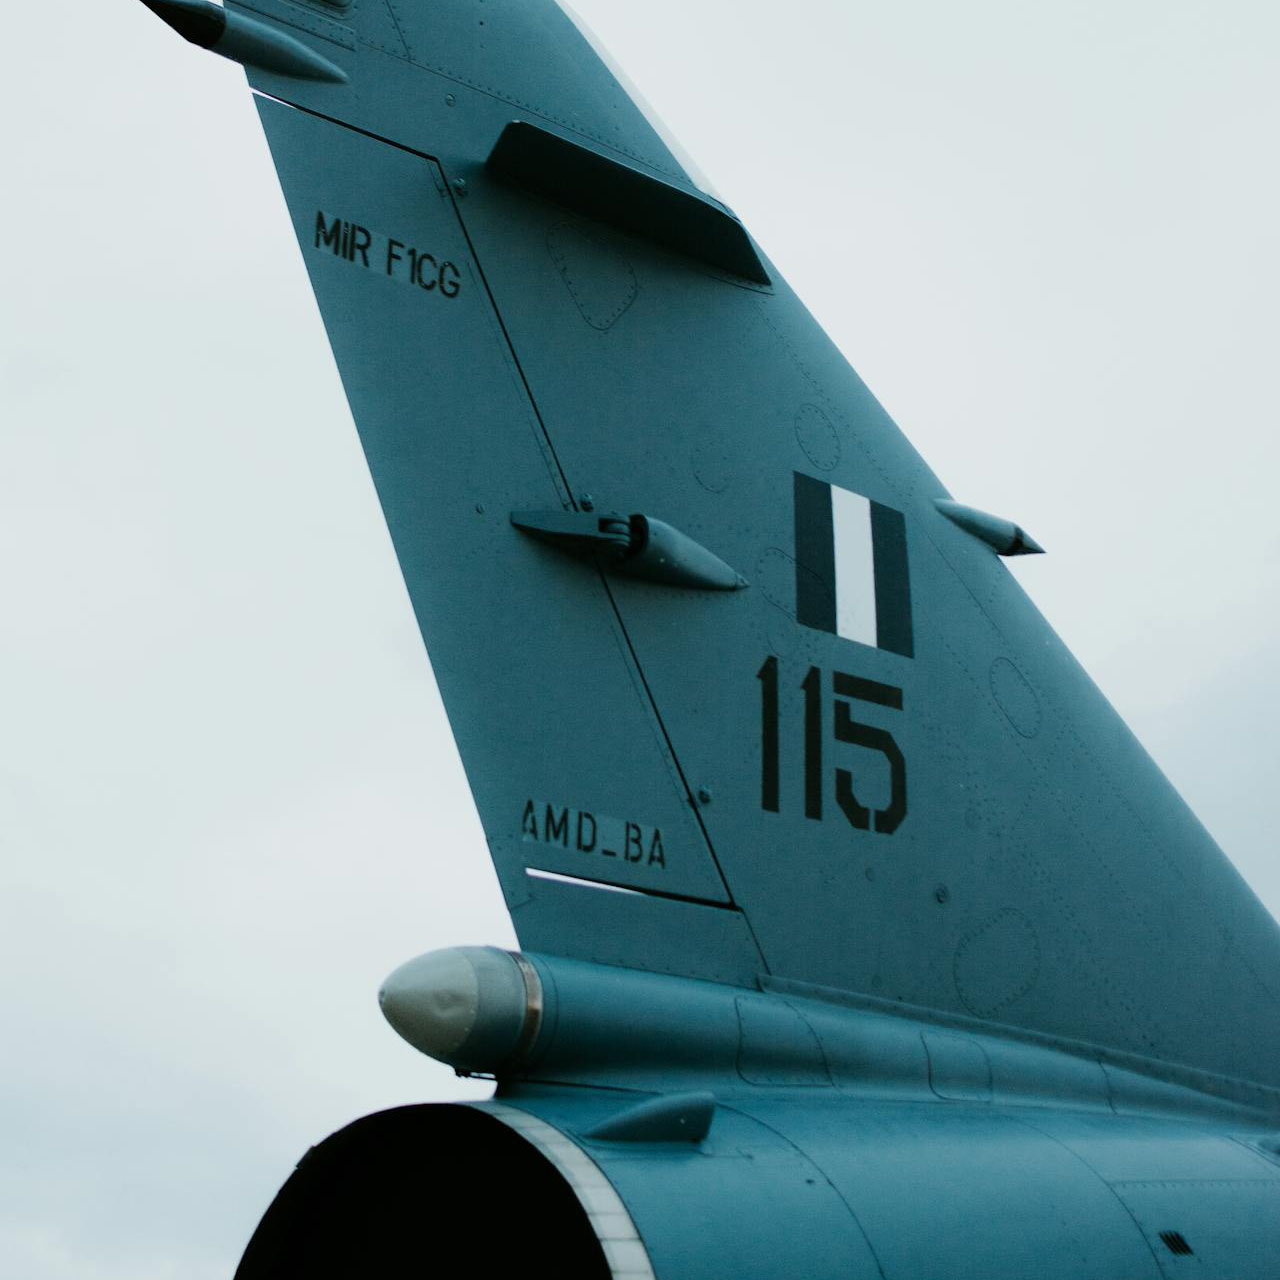 Tail of a fighter jet